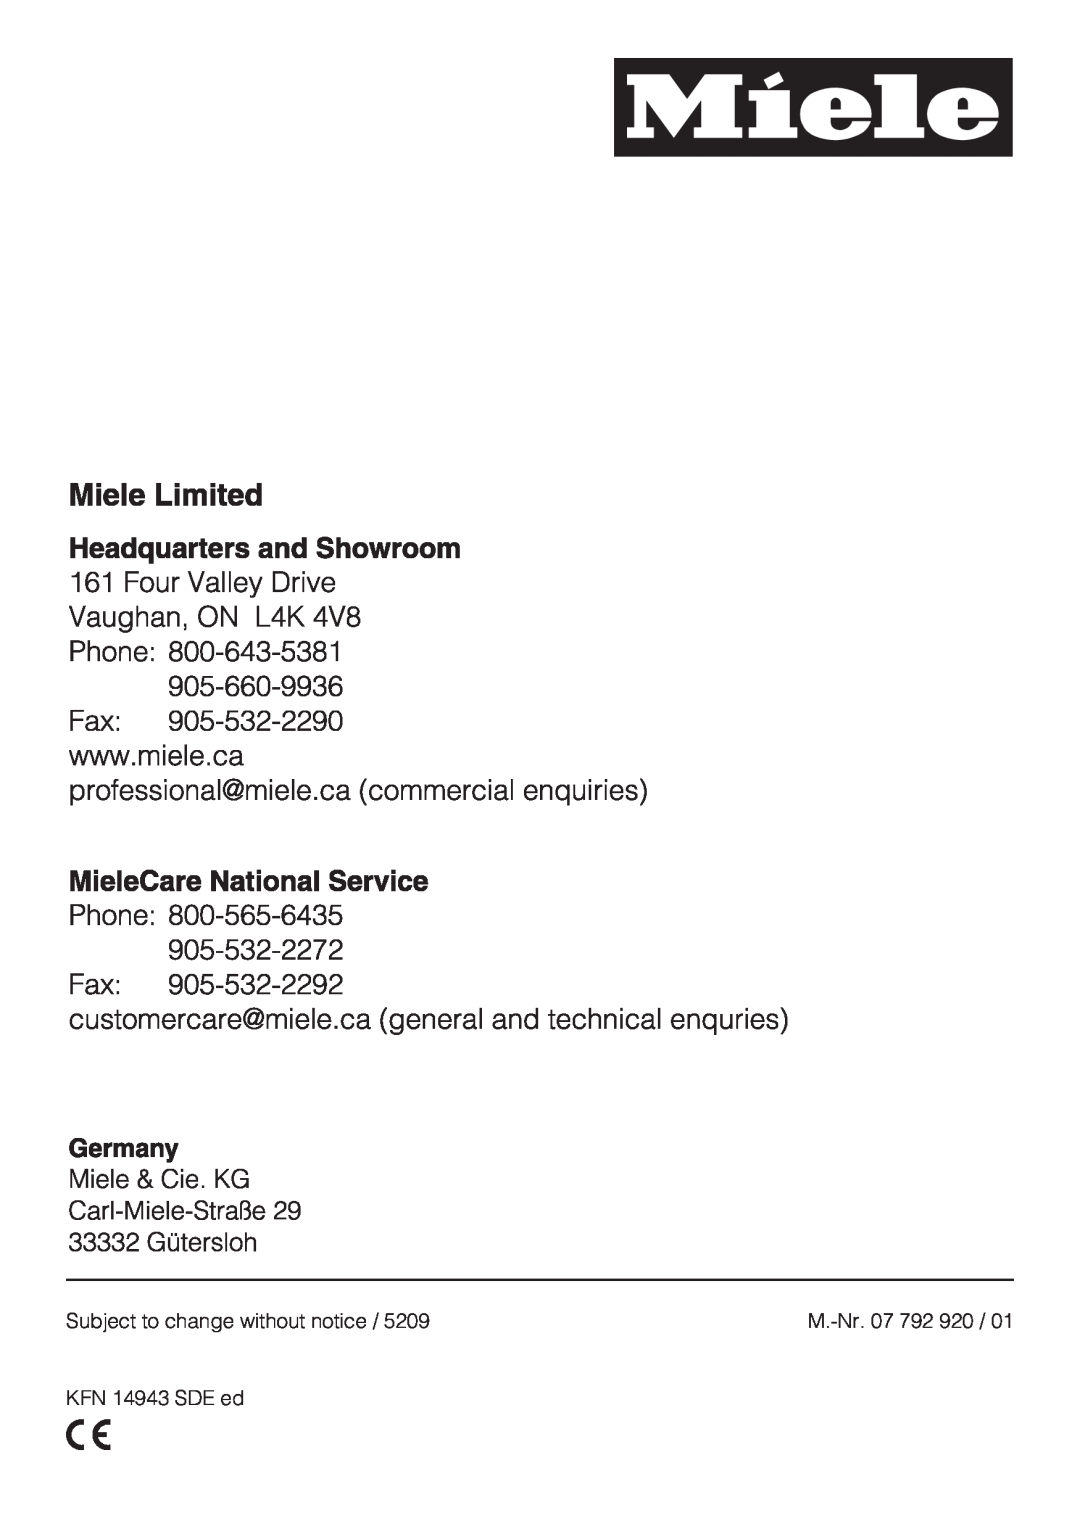 Miele KFN 14943 SDE ED installation instructions Subject to change without notice, M.-Nr.07 792 920, KFN 14943 SDE ed 